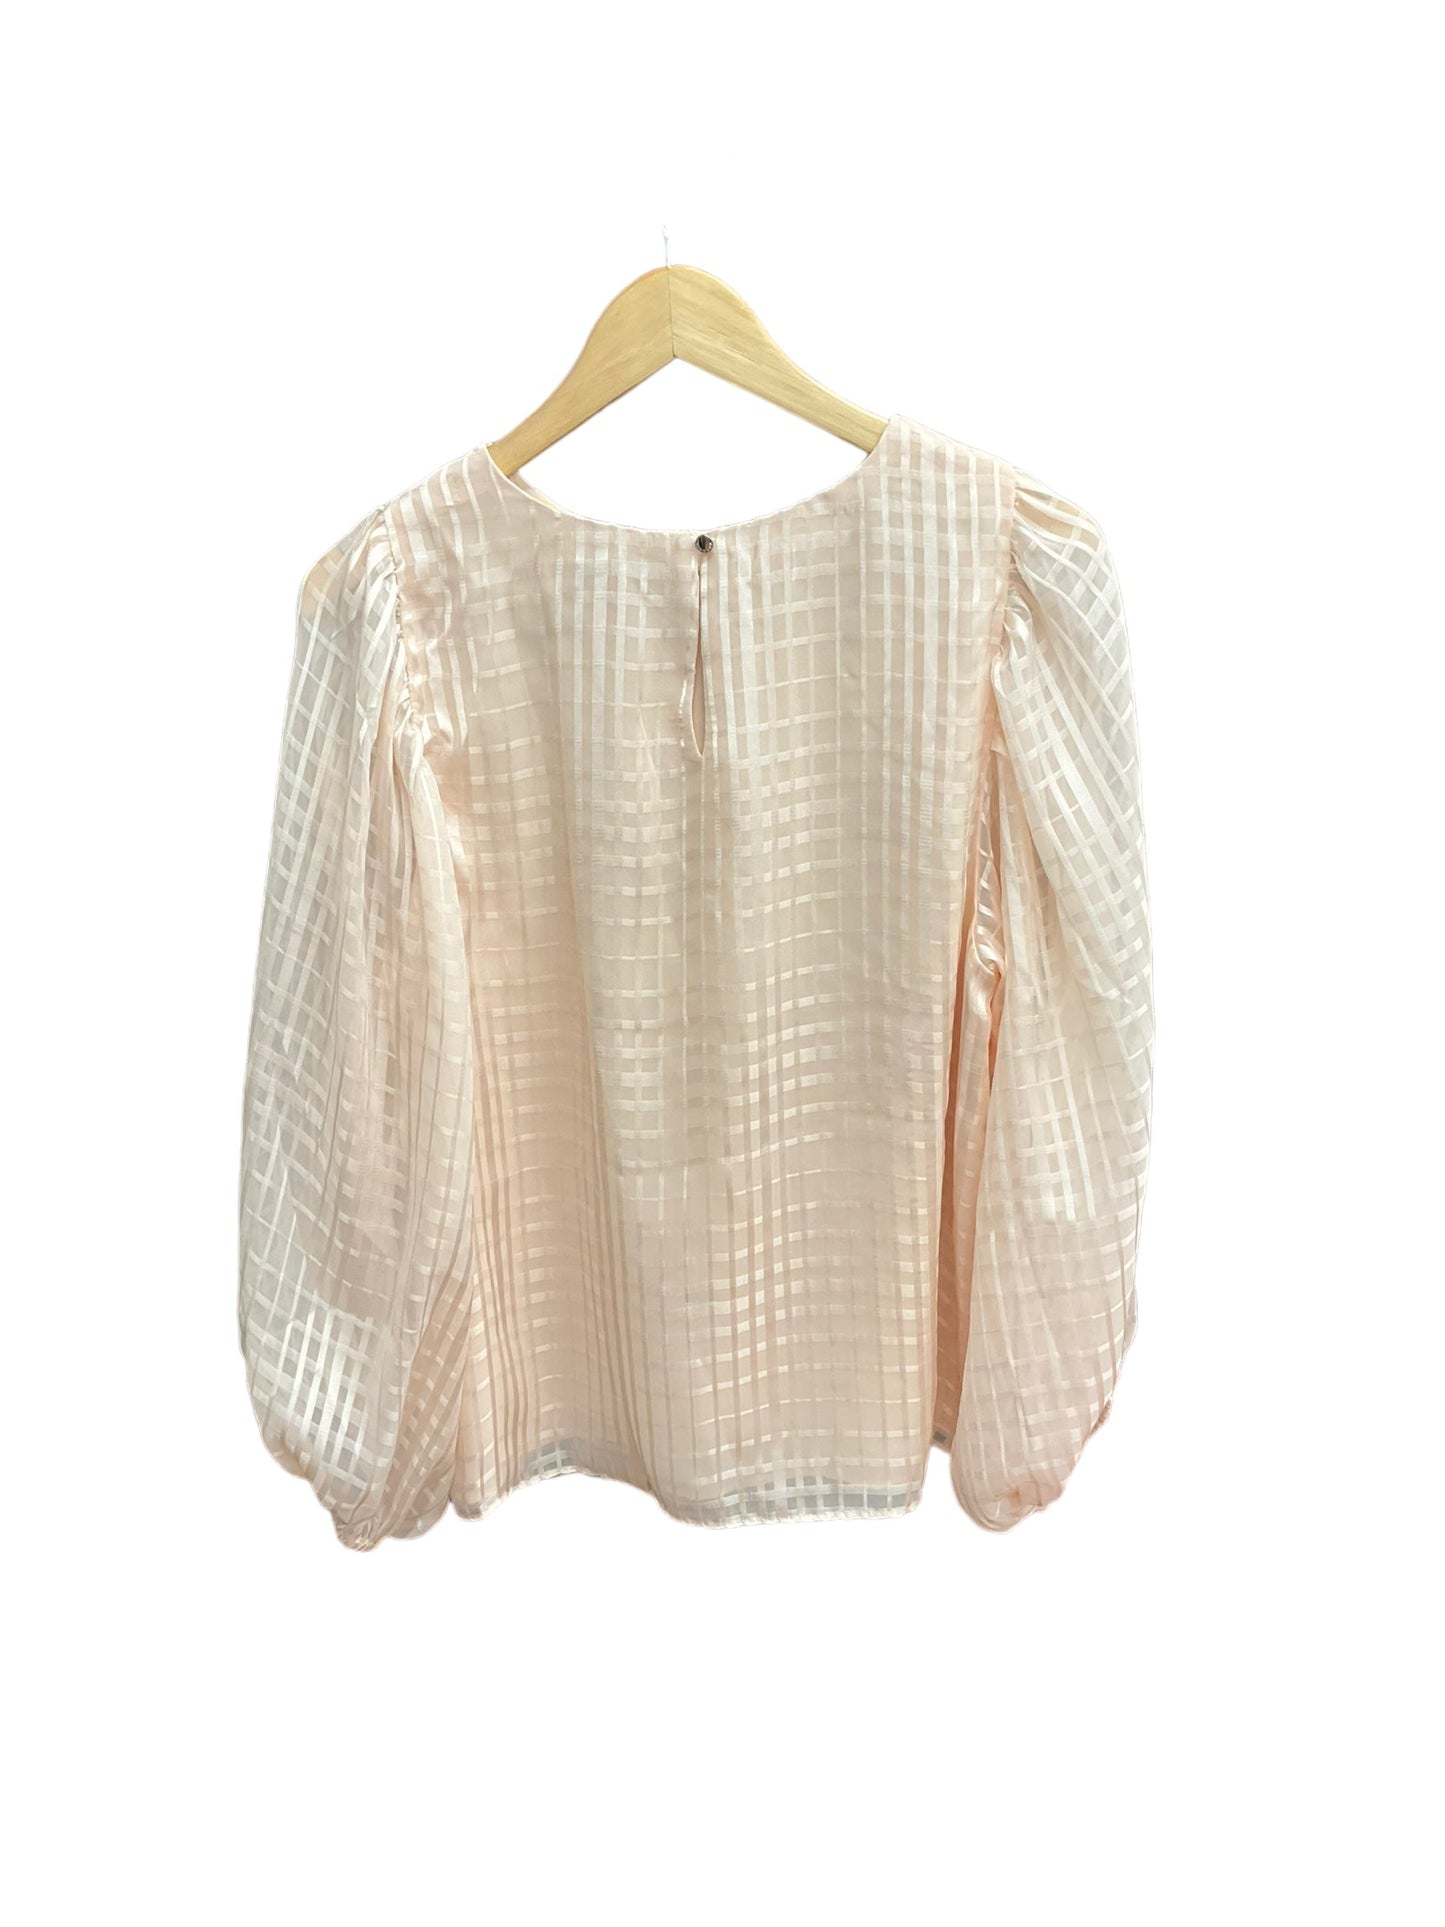 Peach Top Long Sleeve Vince Camuto, Size M